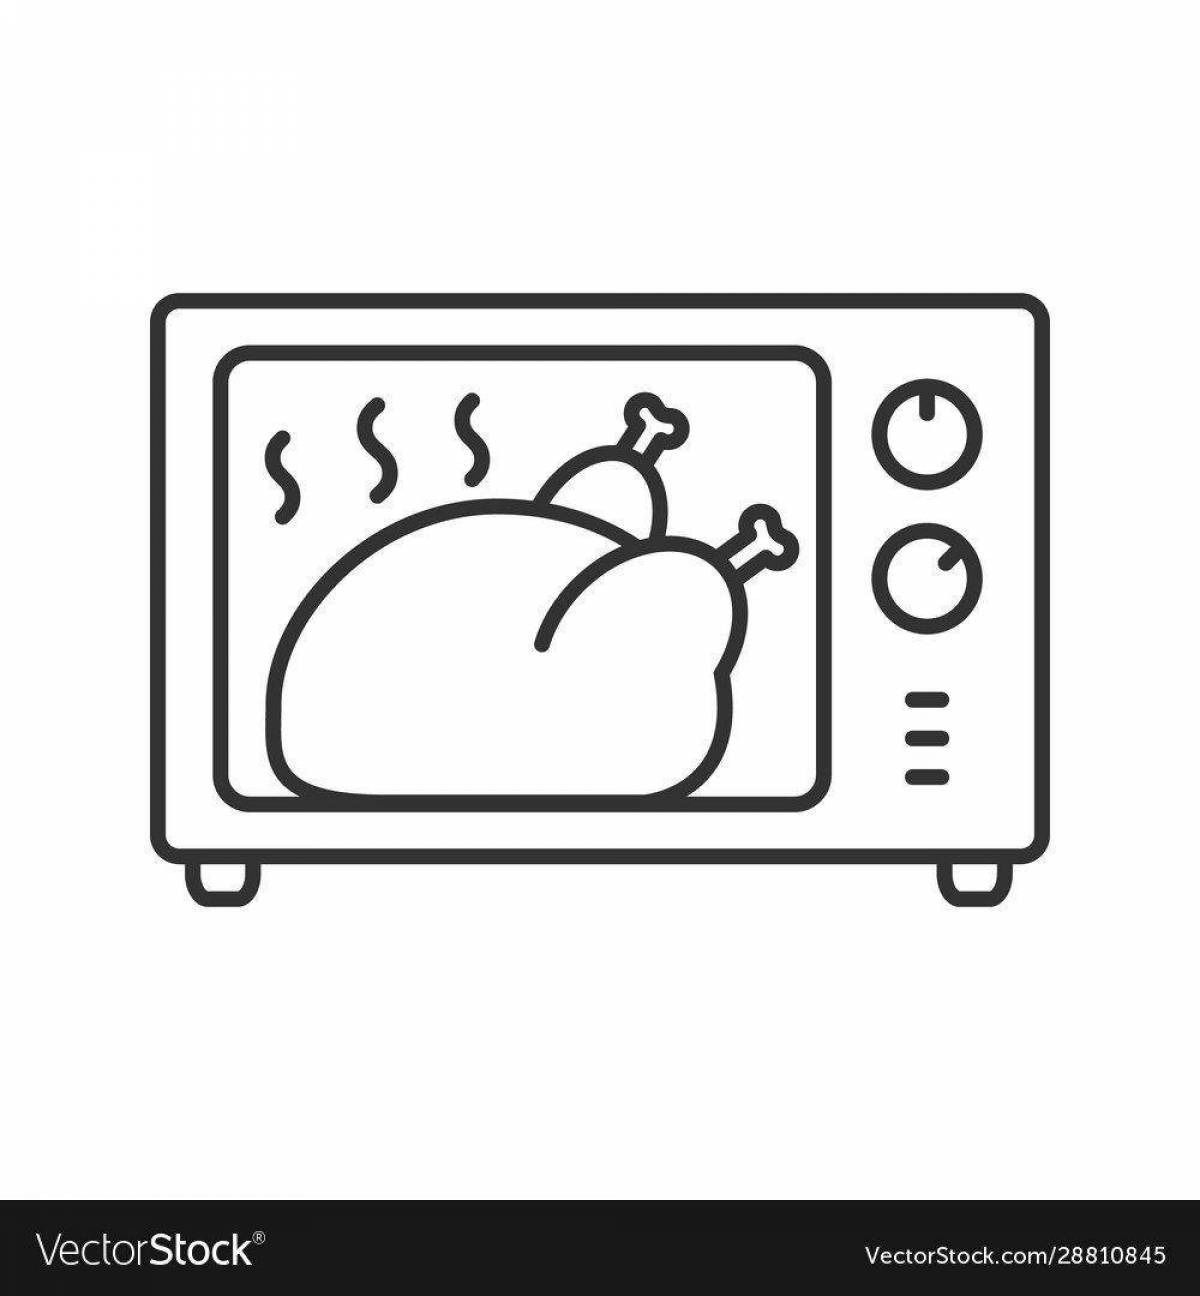 Adorable microwave coloring book